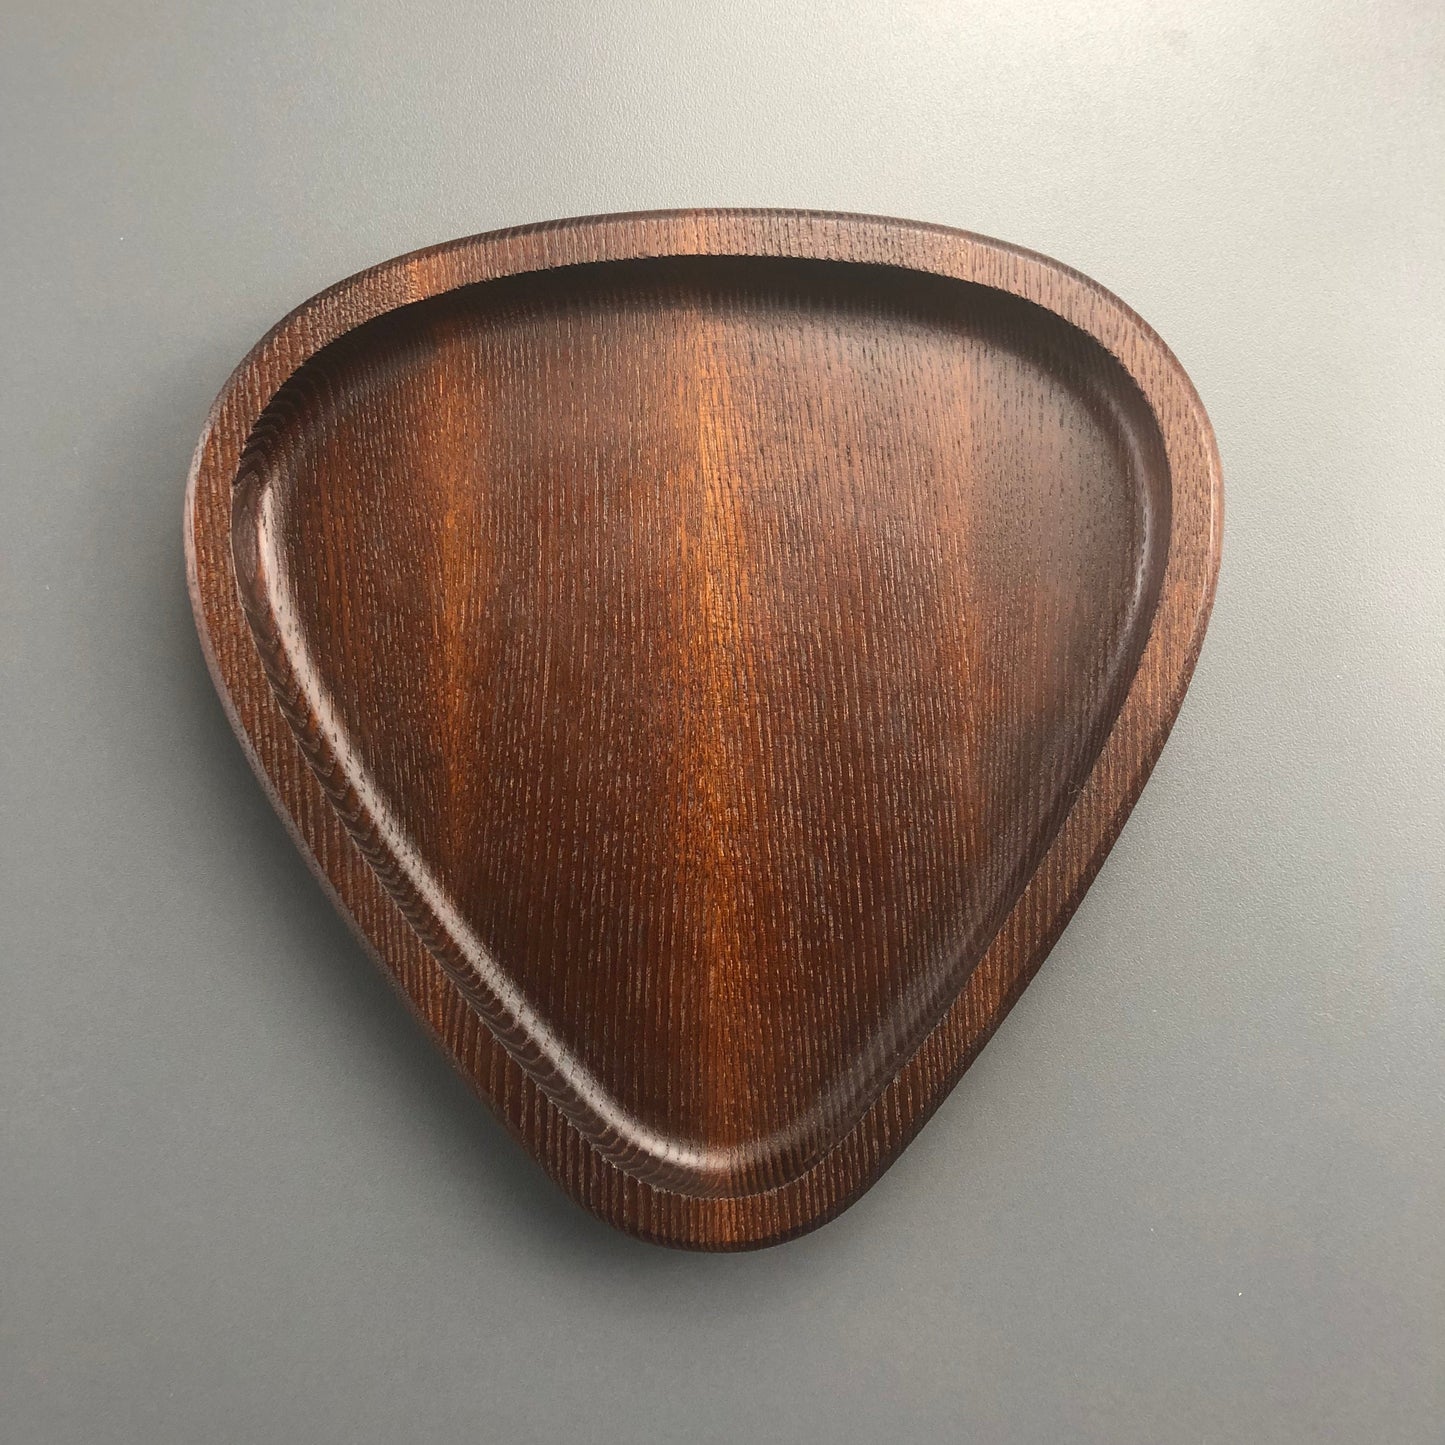 guitar pick catch-all tray